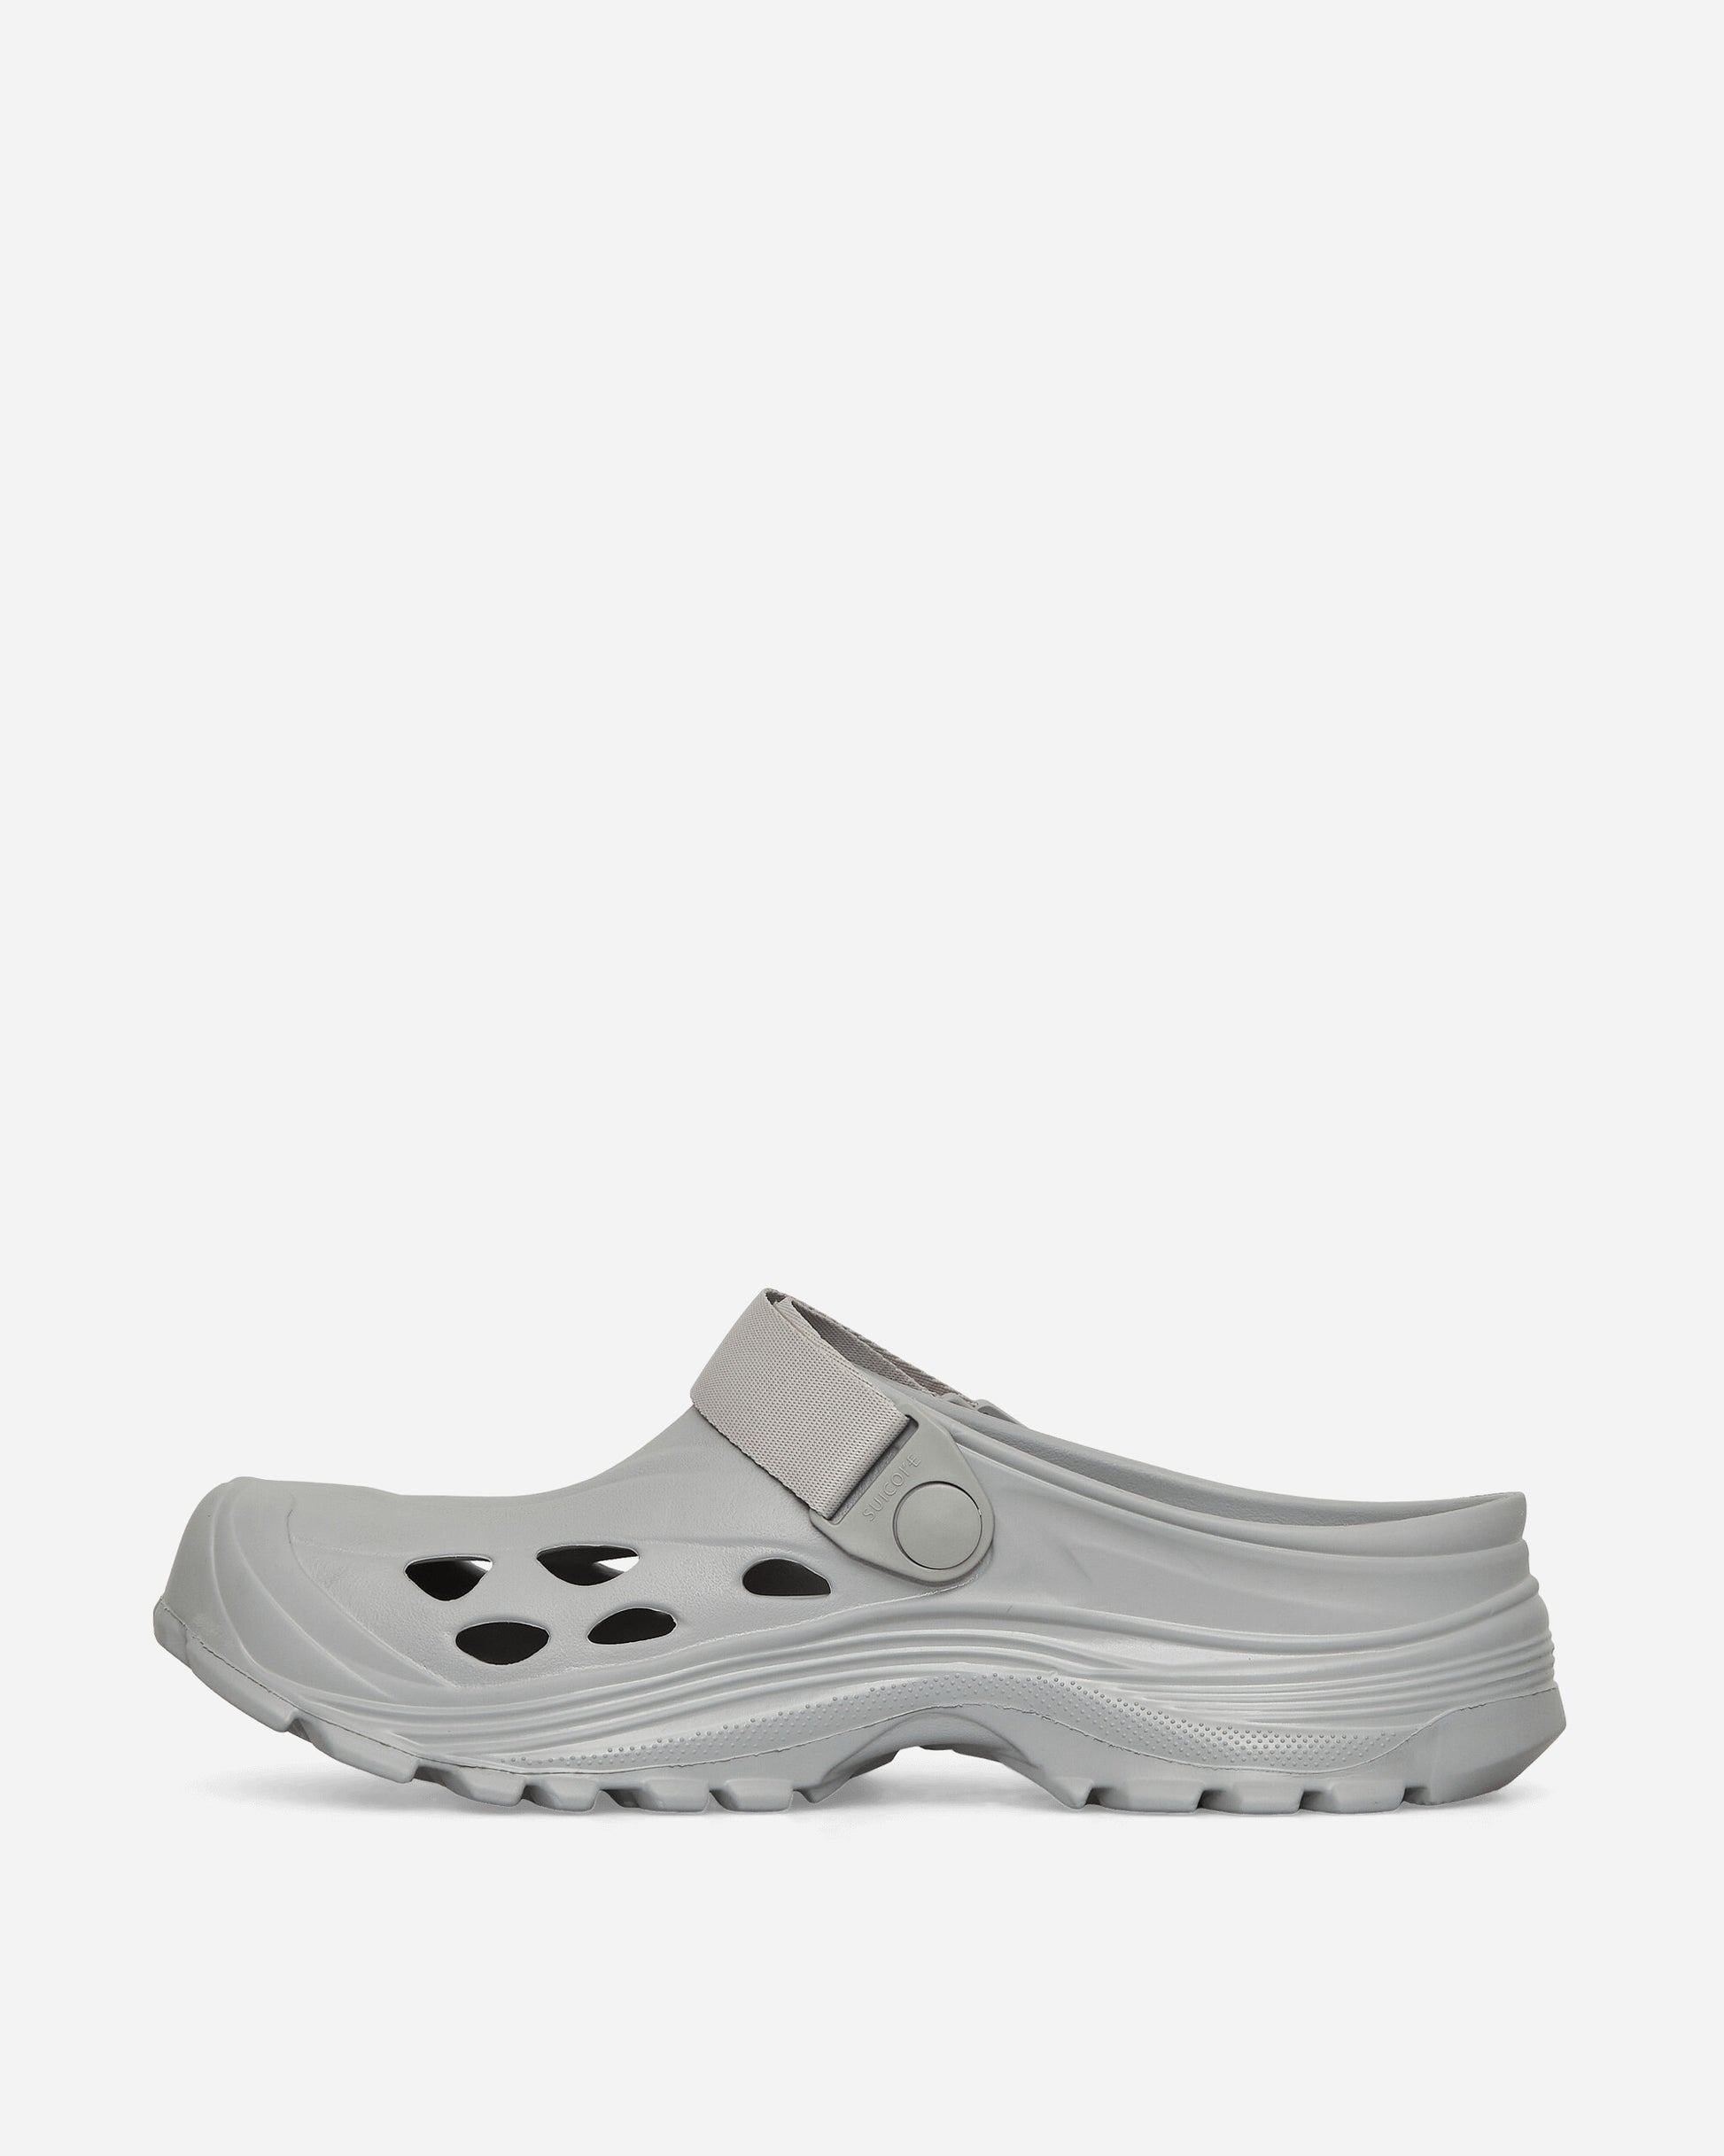 Suicoke Mok Gray Sandals and Slides Sandals and Mules OGINJ101 GRY